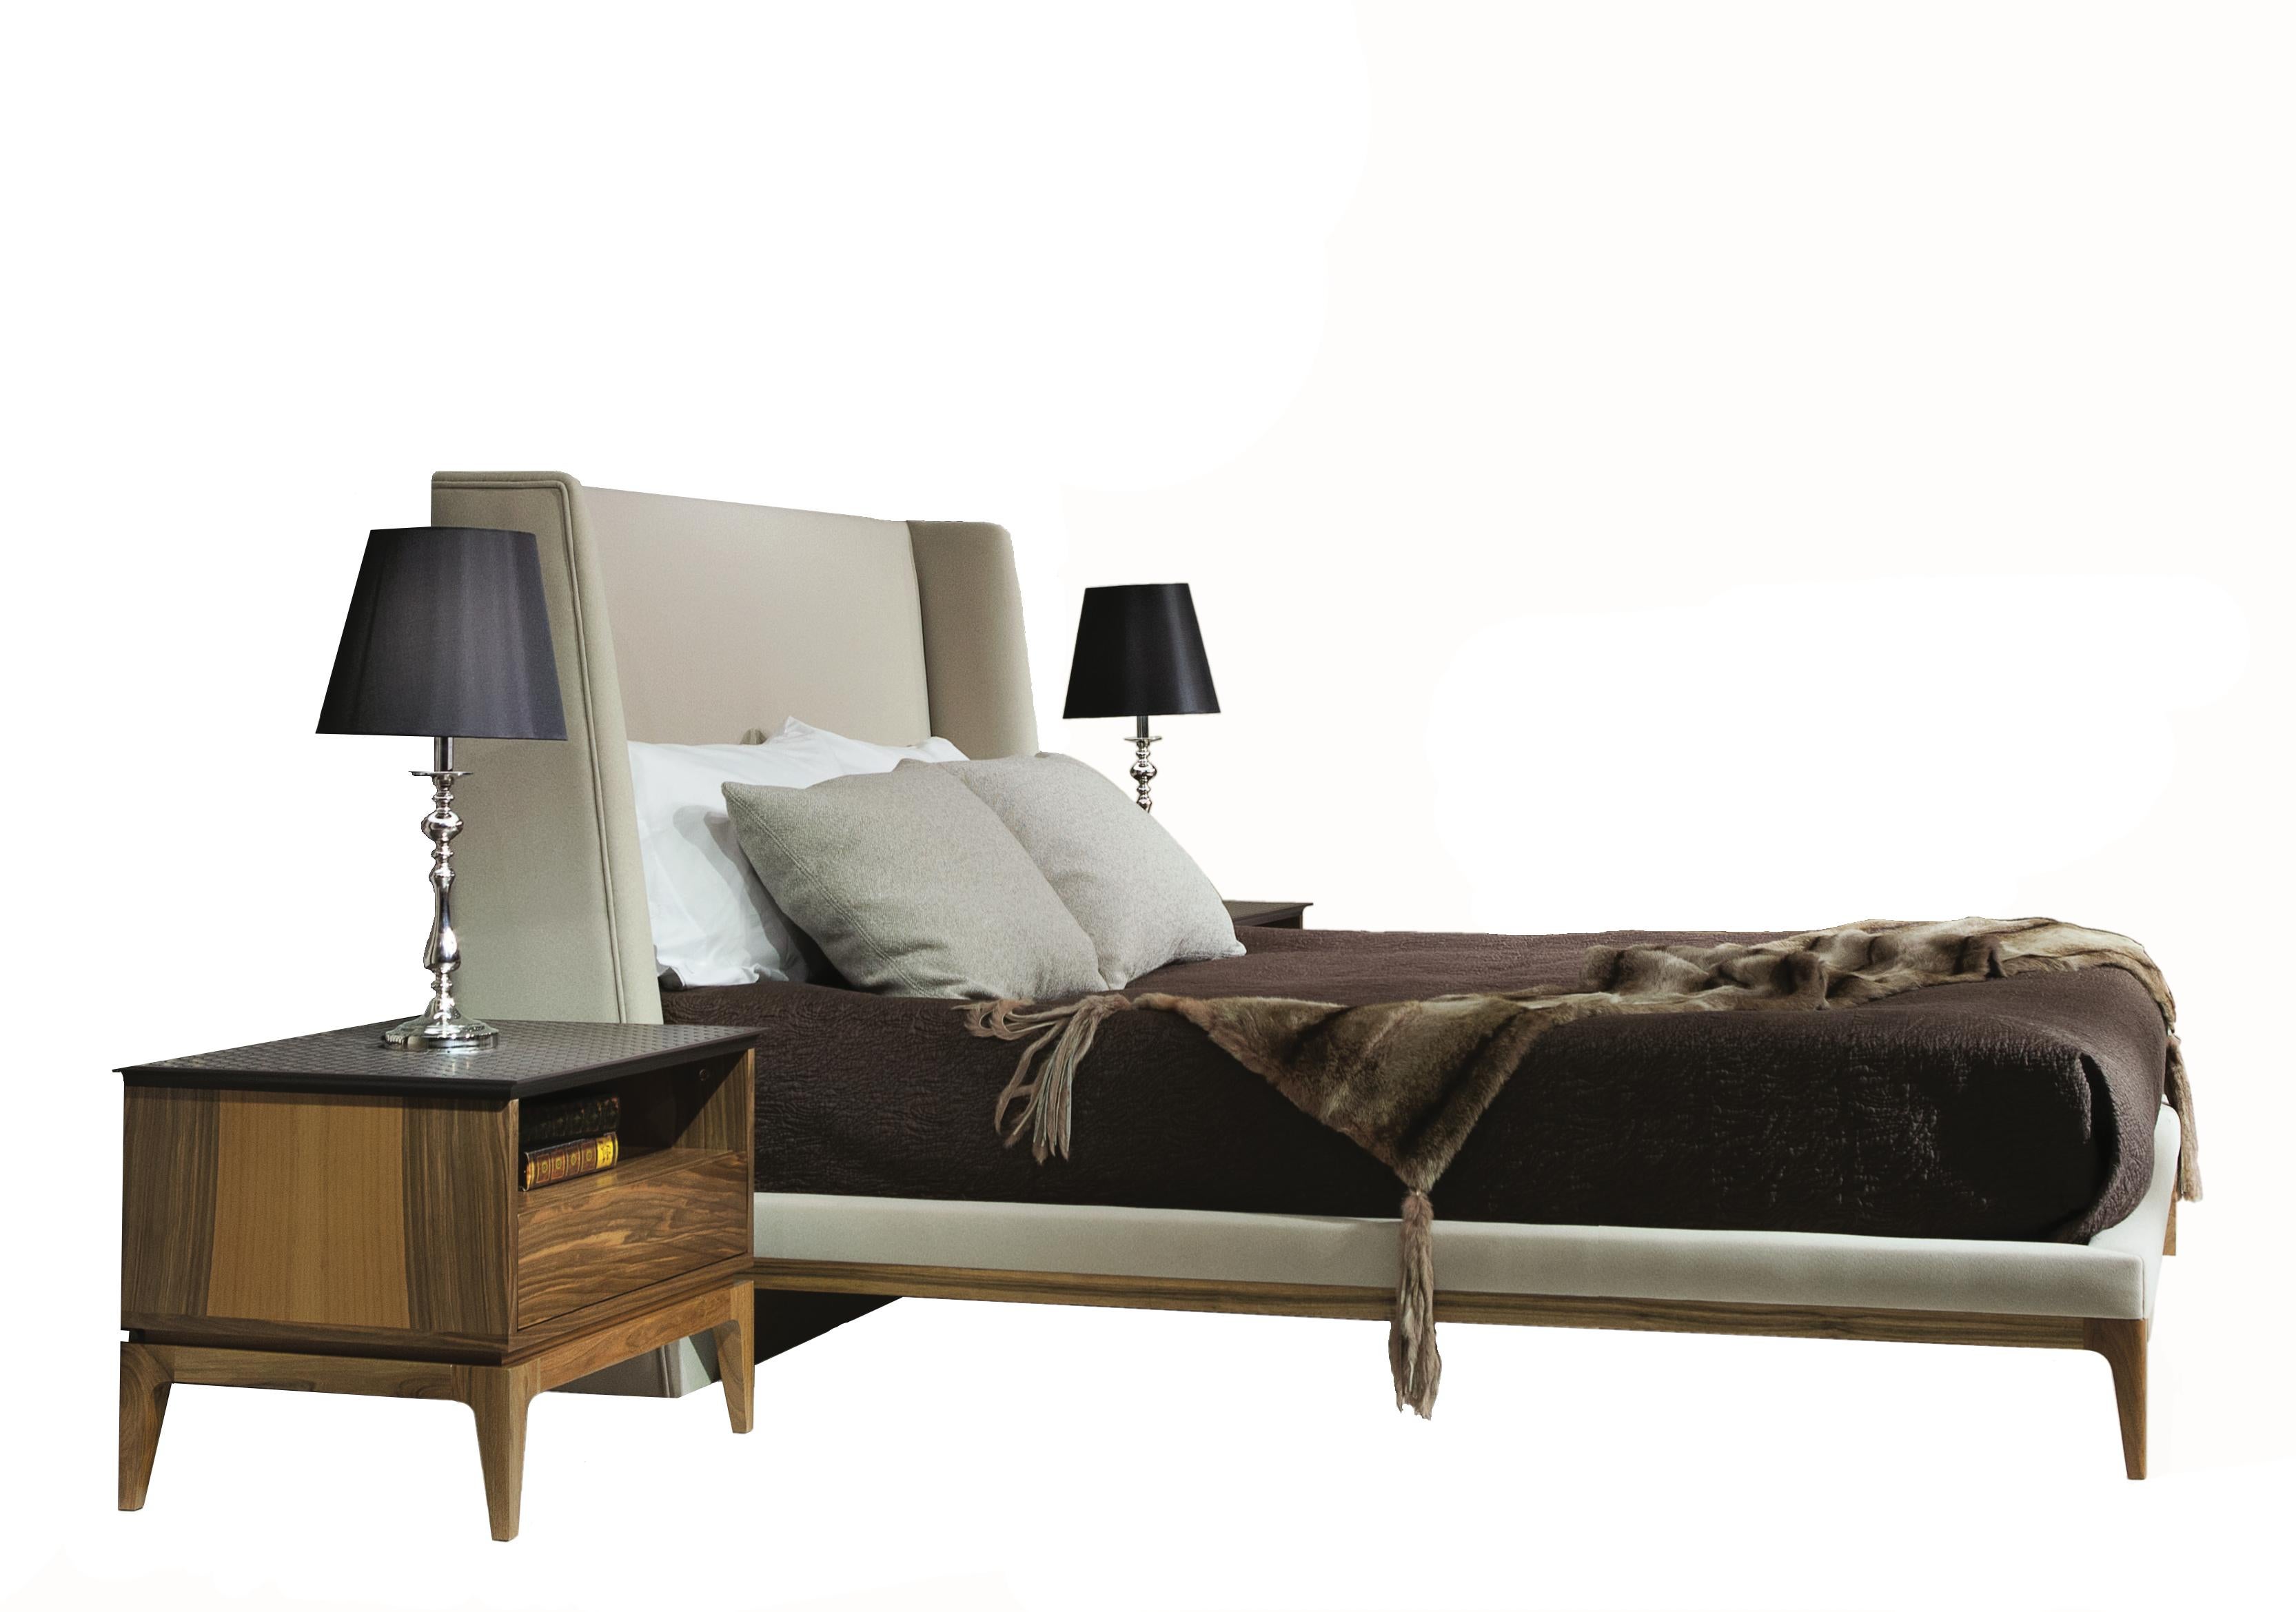 With its streamlined headboard and gently tapered legs, the Cloud Bed’s refined profile suits any style.